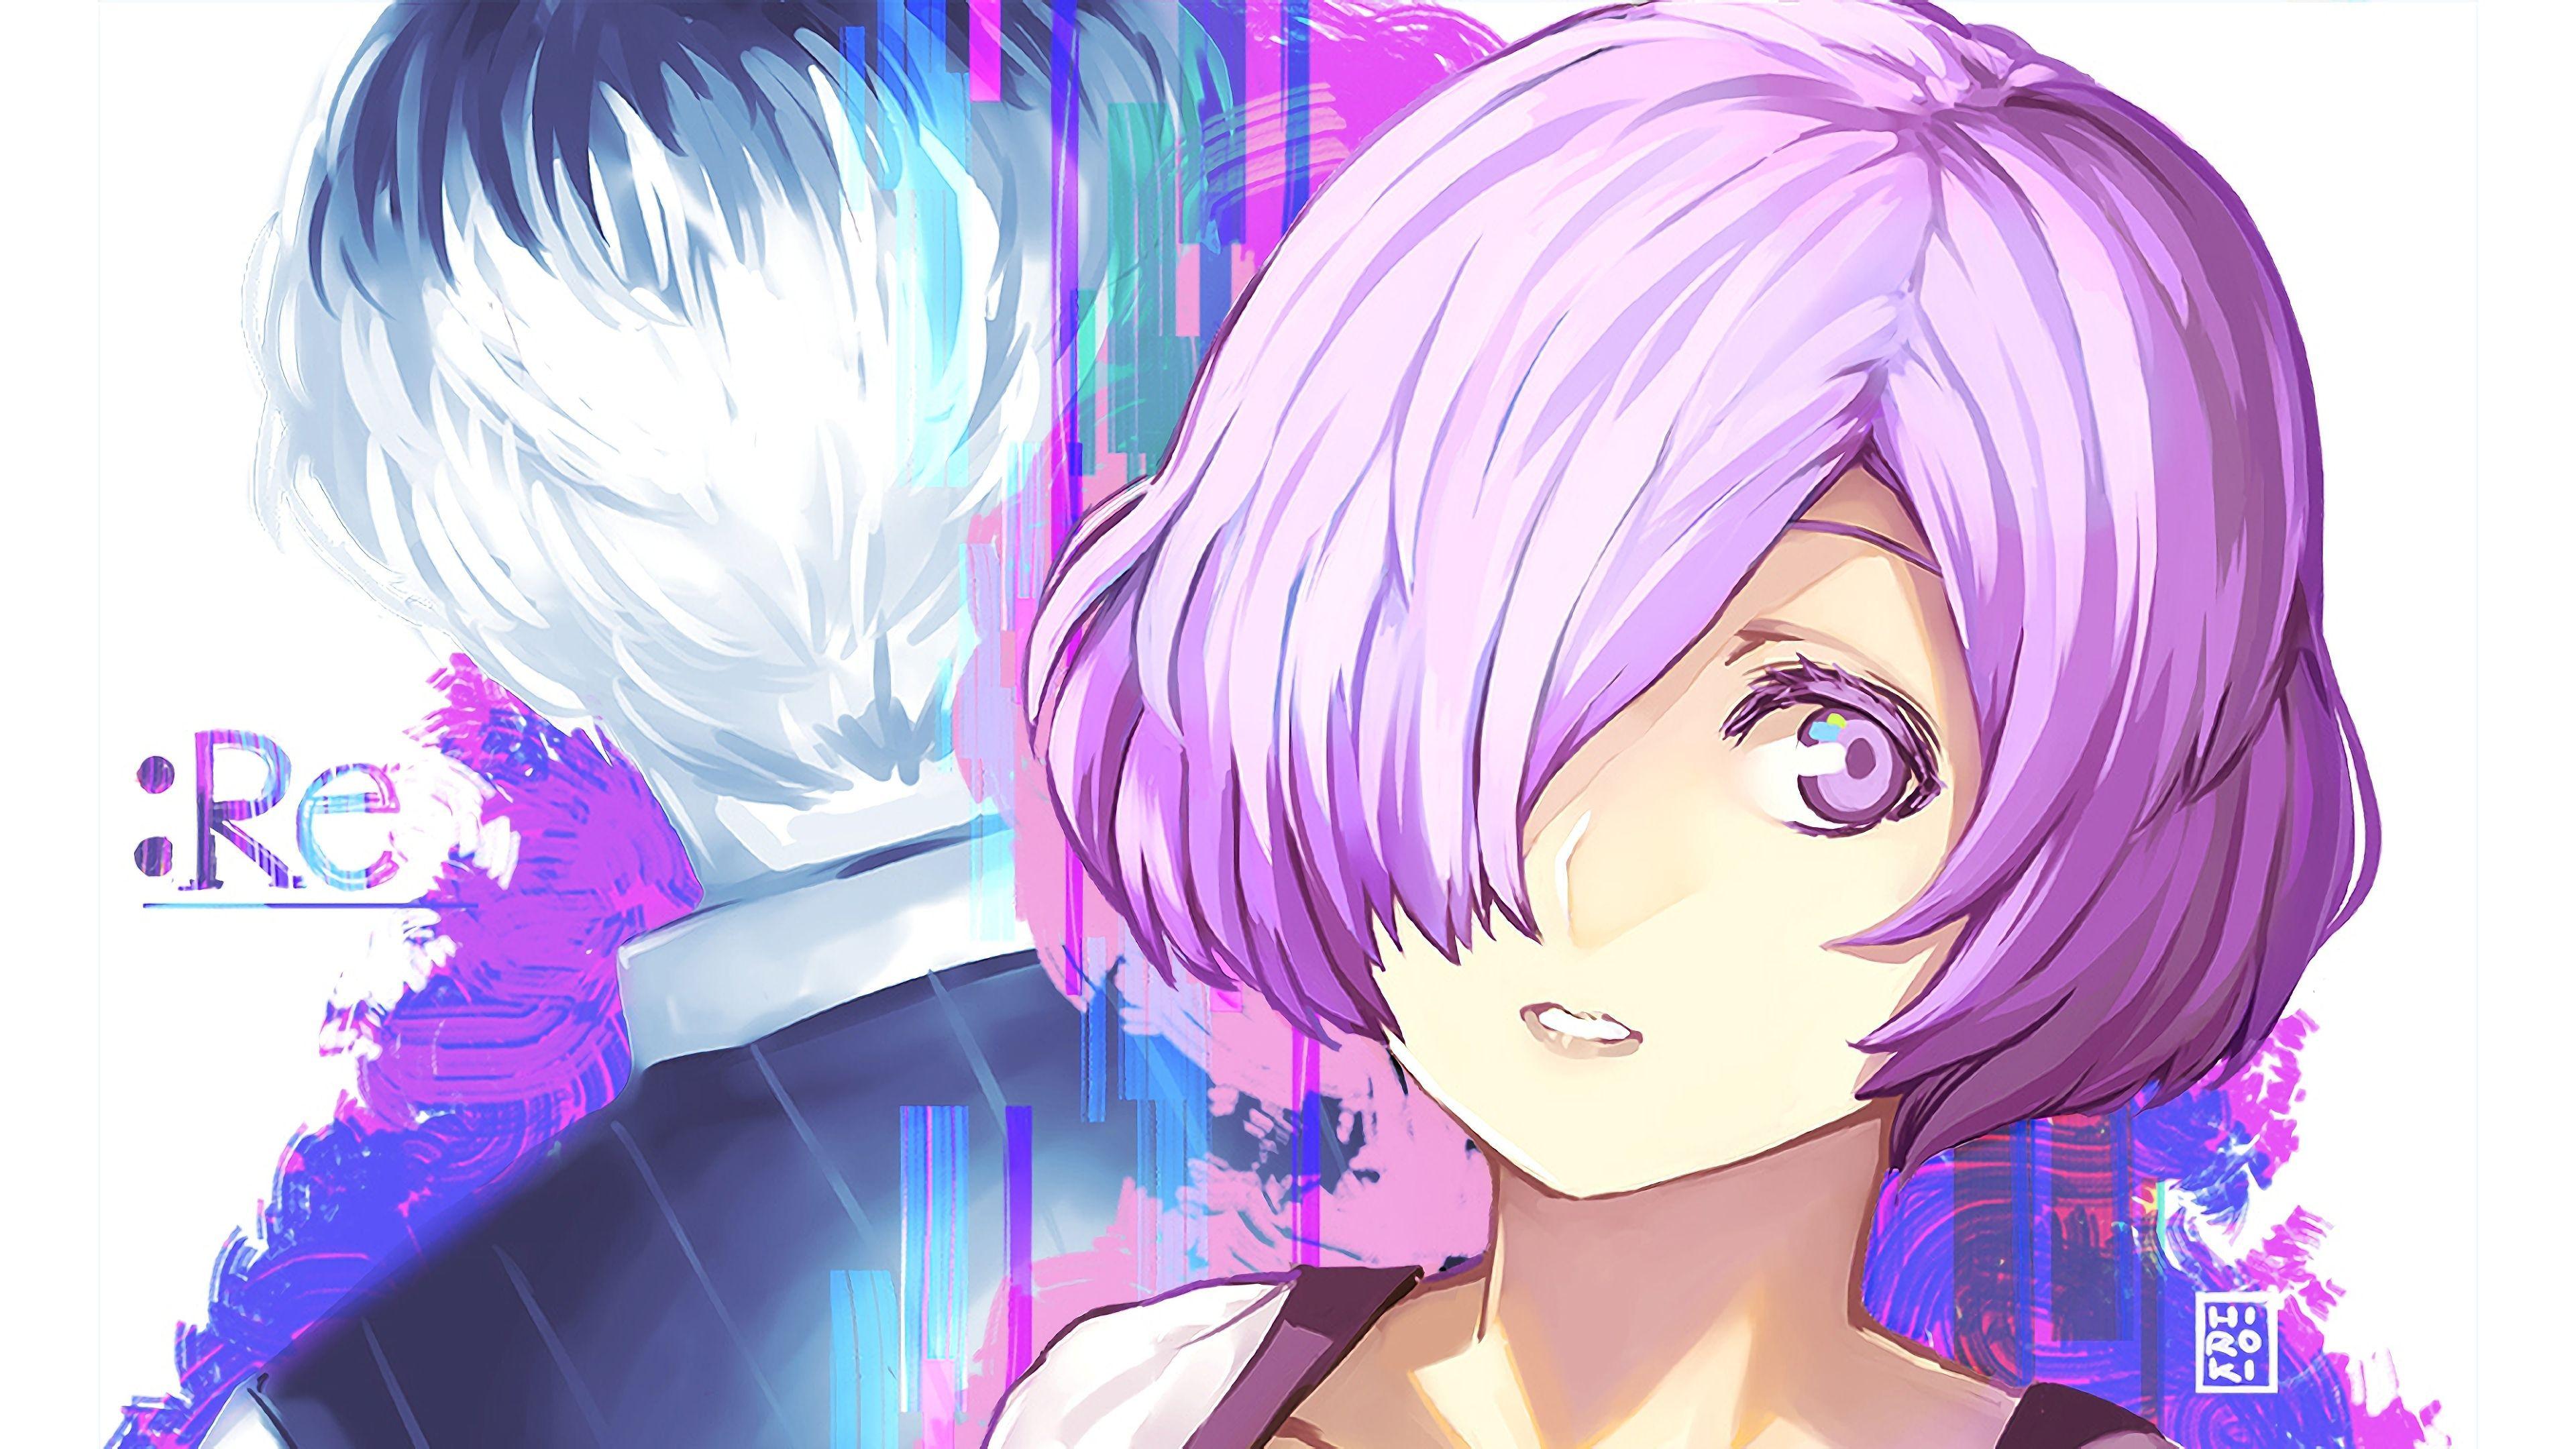 Touka Tokyo Ghoul Re Wallpapers Top Free Touka Tokyo Ghoul Re